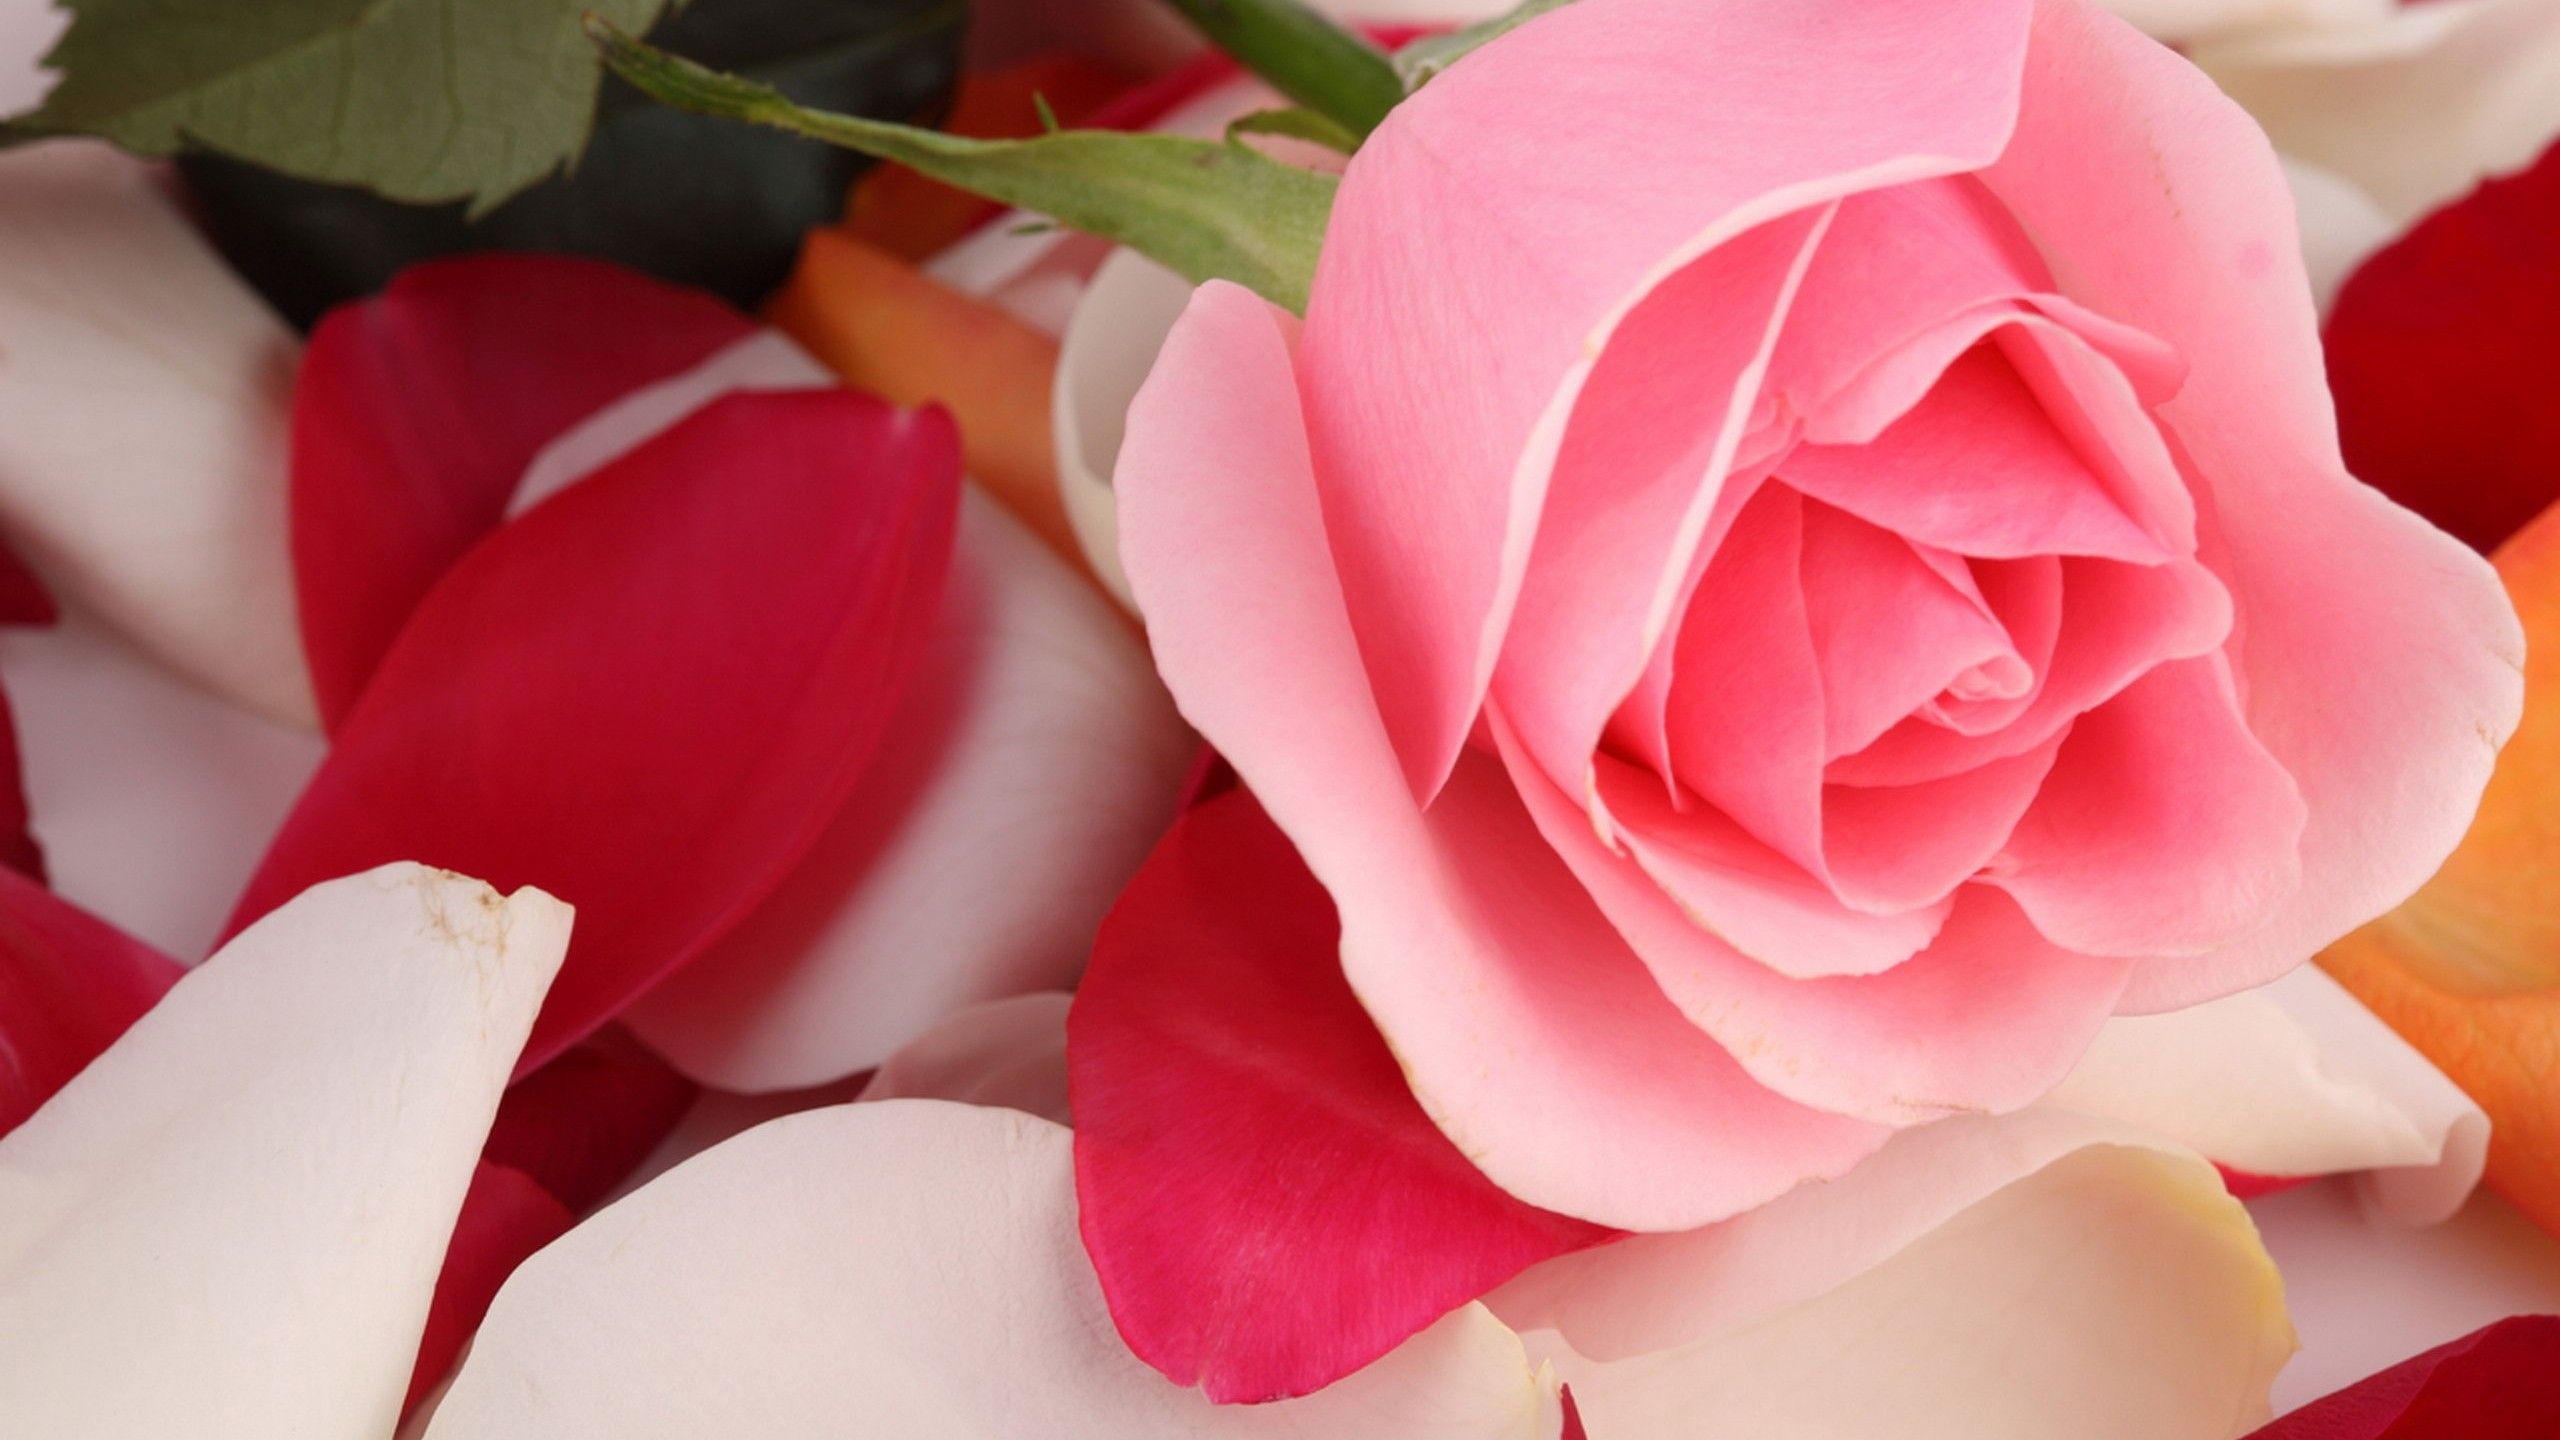 Wallpaper Pink rose, Rose petals, HD, Flowers,. Wallpaper for iPhone, Android, Mobile and Desktop